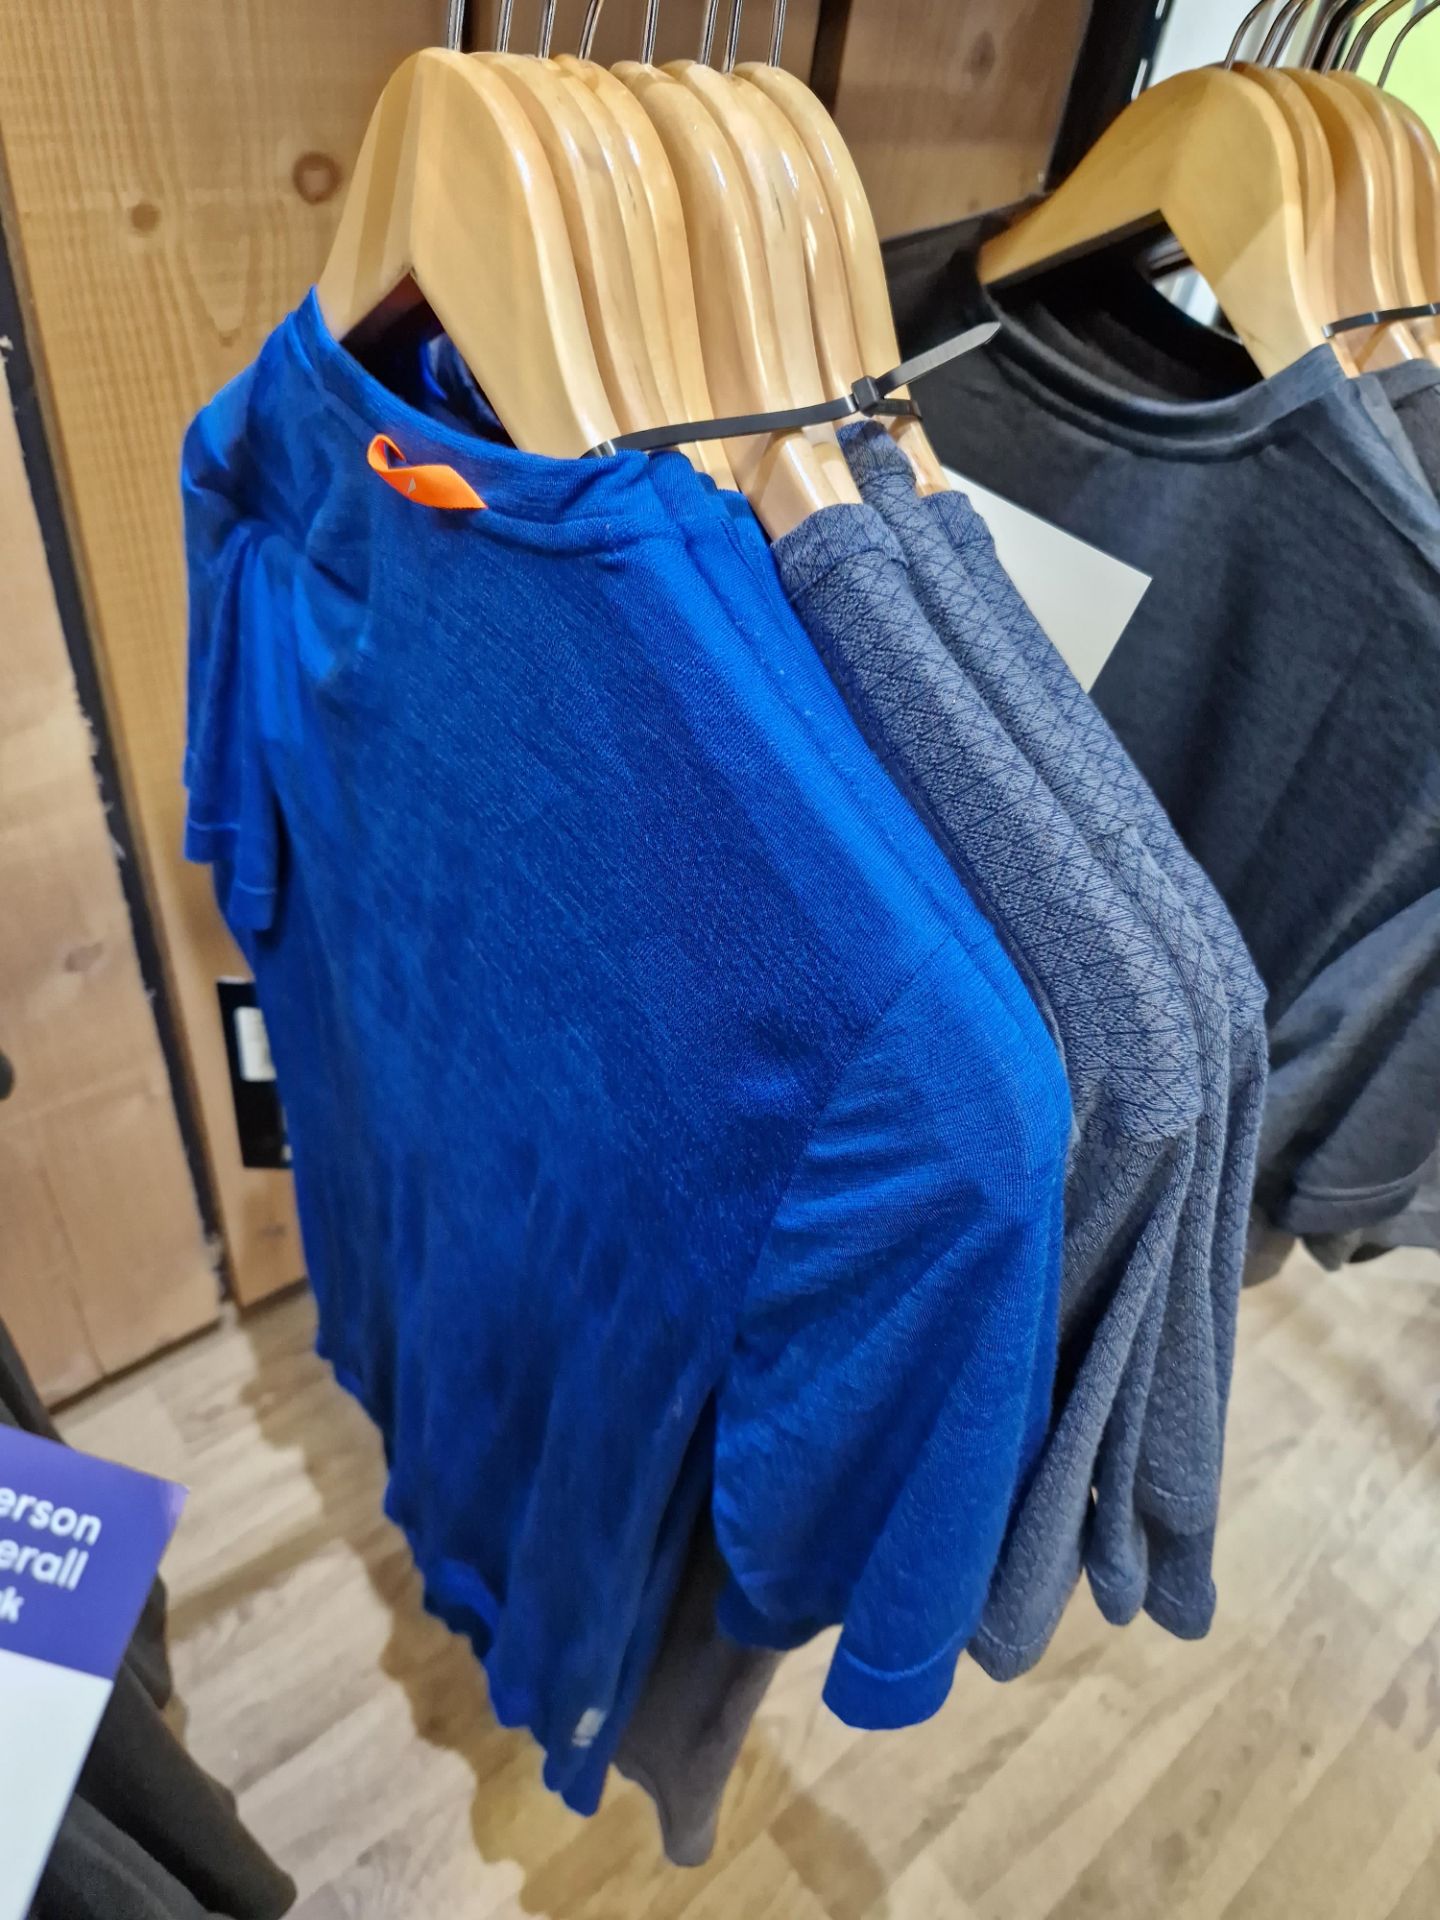 Eight Salewa T-Shirts, Colours: Dark Denim / Electric Blue, Sizes: Ranging from XS to L Please - Image 2 of 2